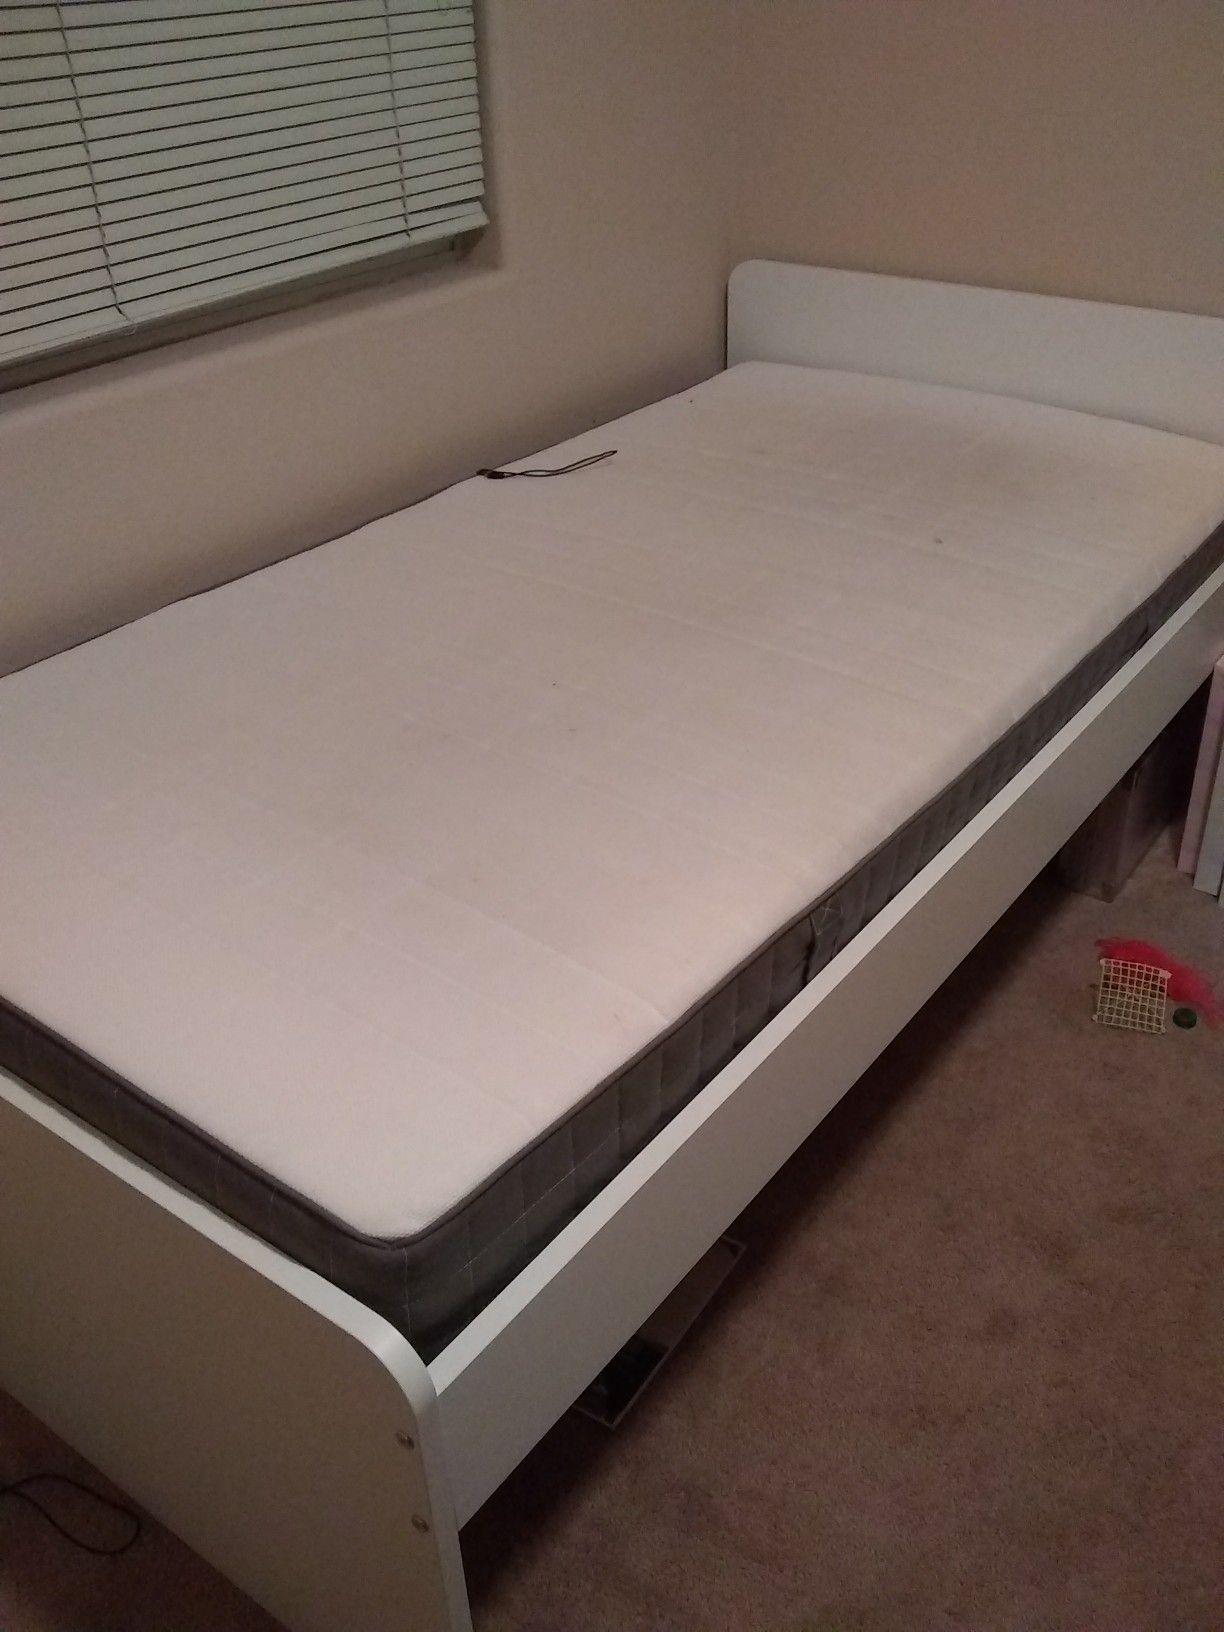 Full size bed and frame